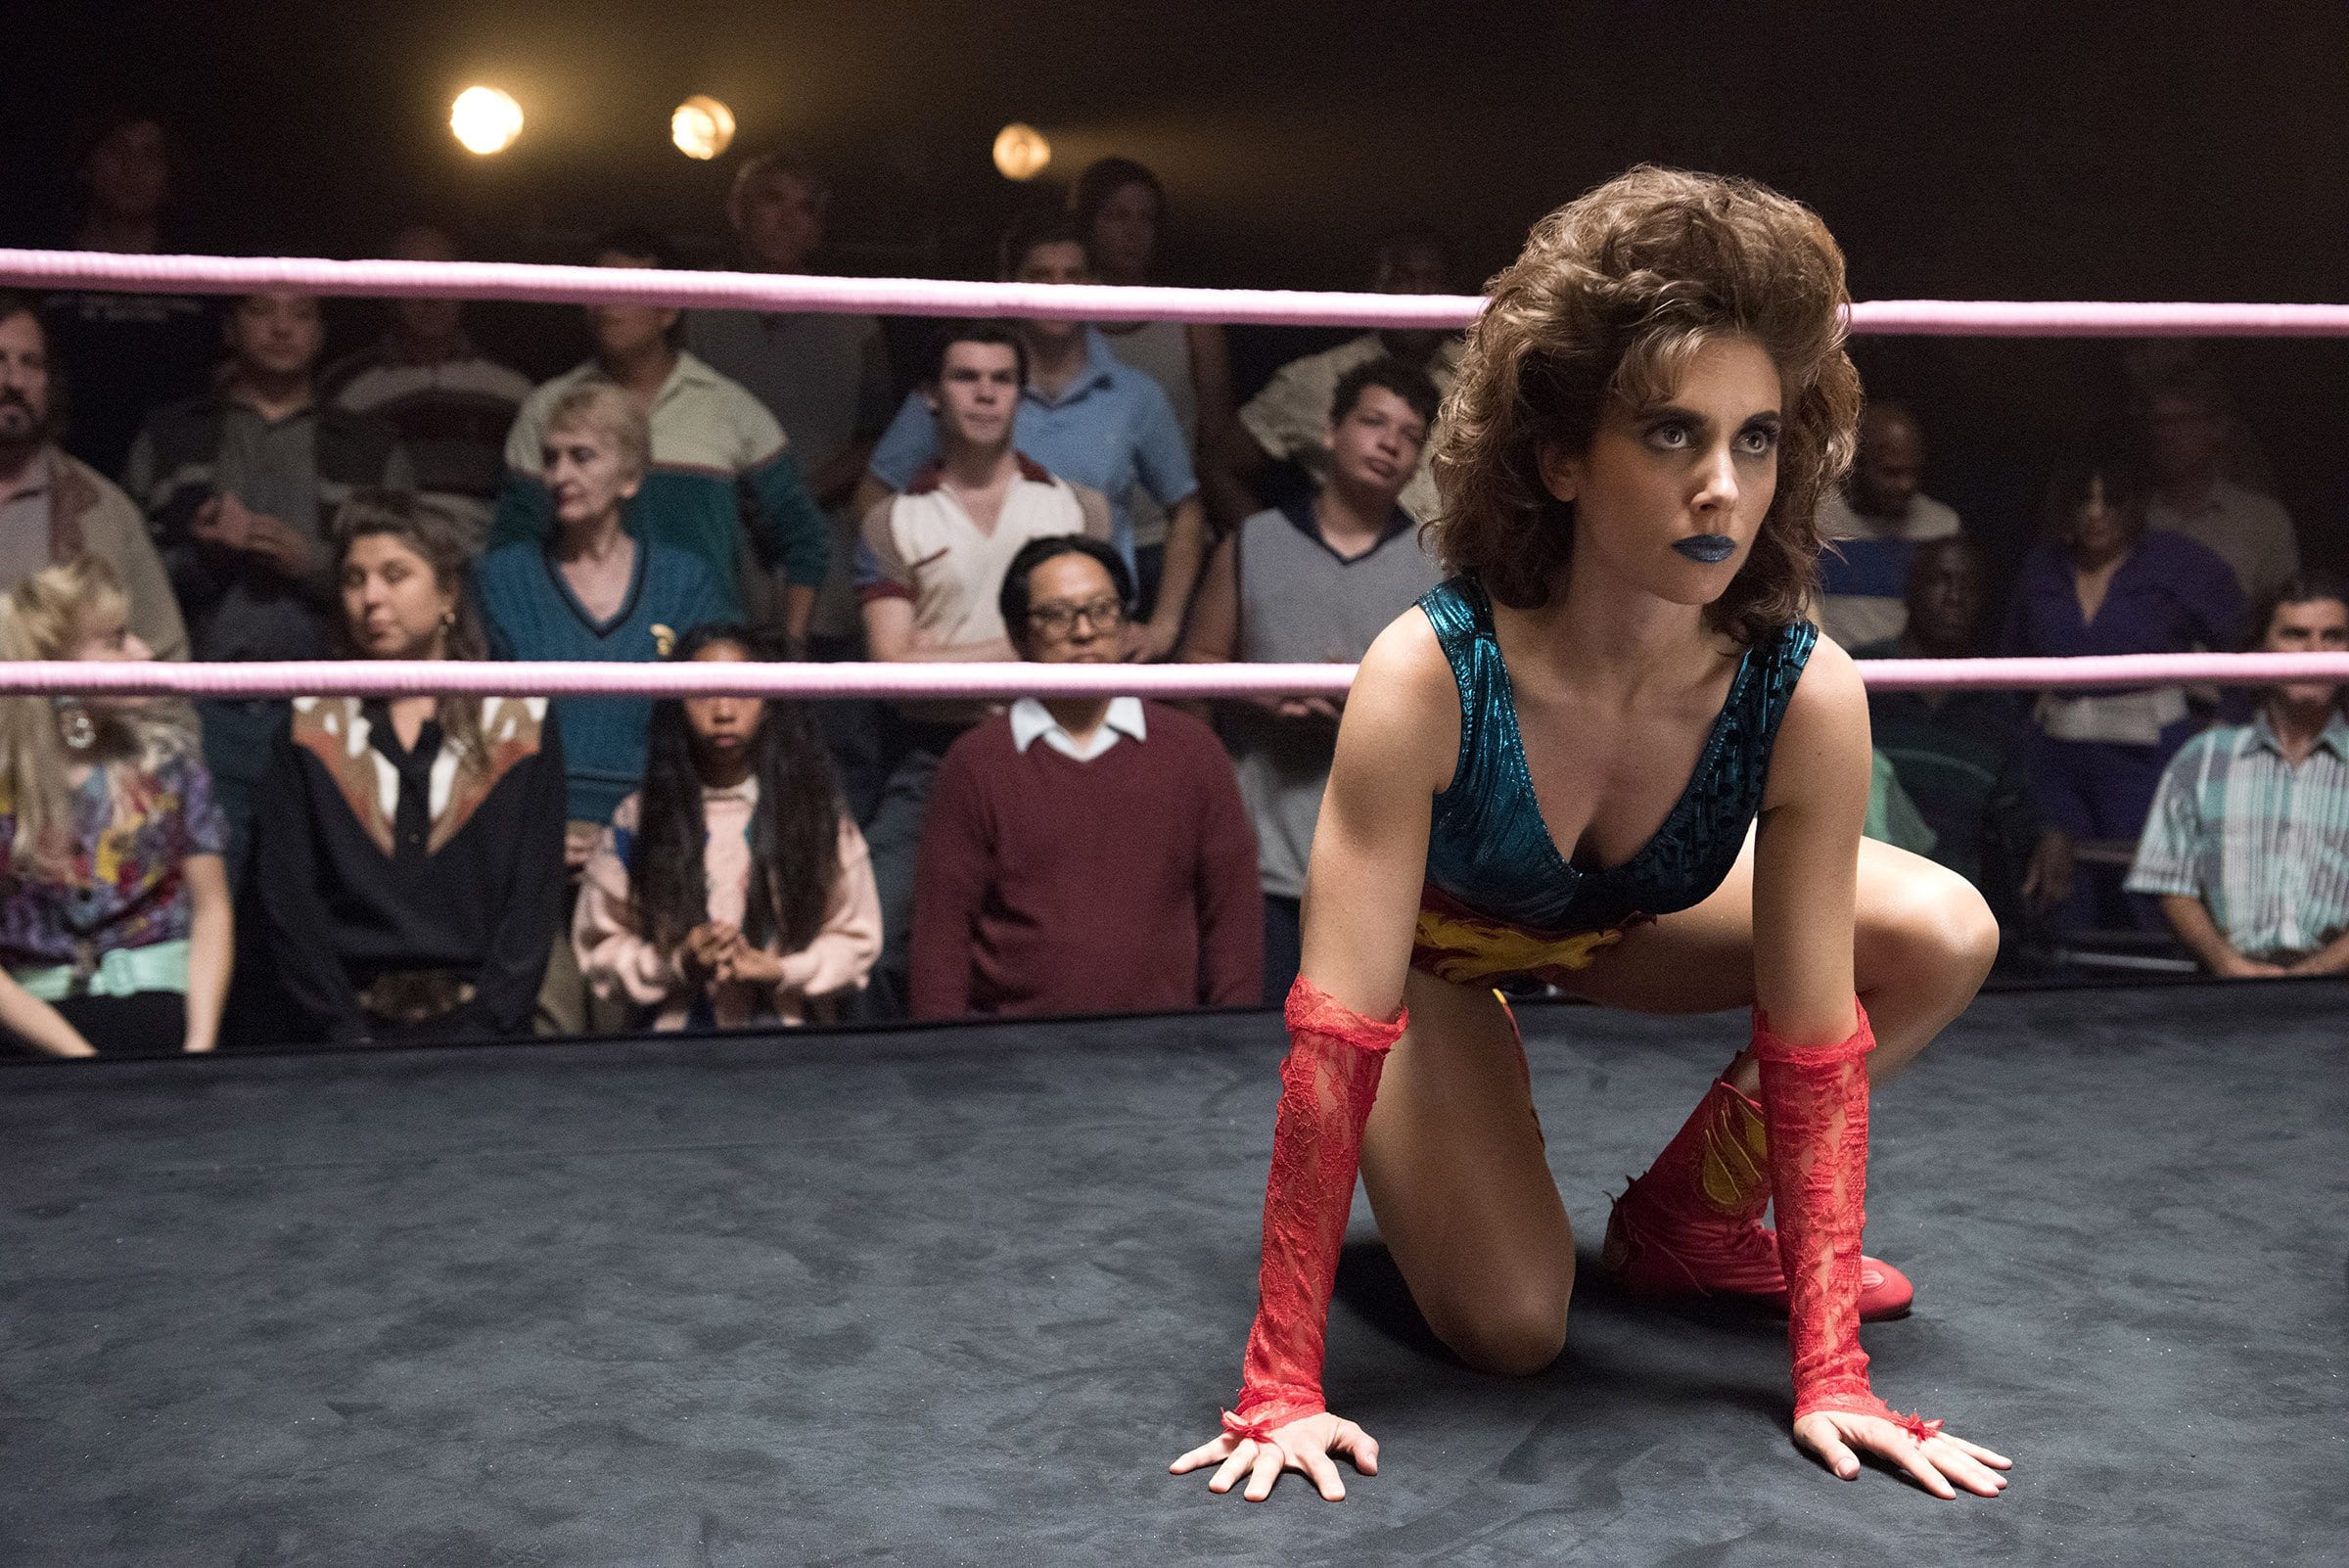 'GLOW', Jenji Kohan’s radiant new Netflix show about famed television franchise 'Gorgeous Ladies of Wrestling', proves everything she touches turns to gold.